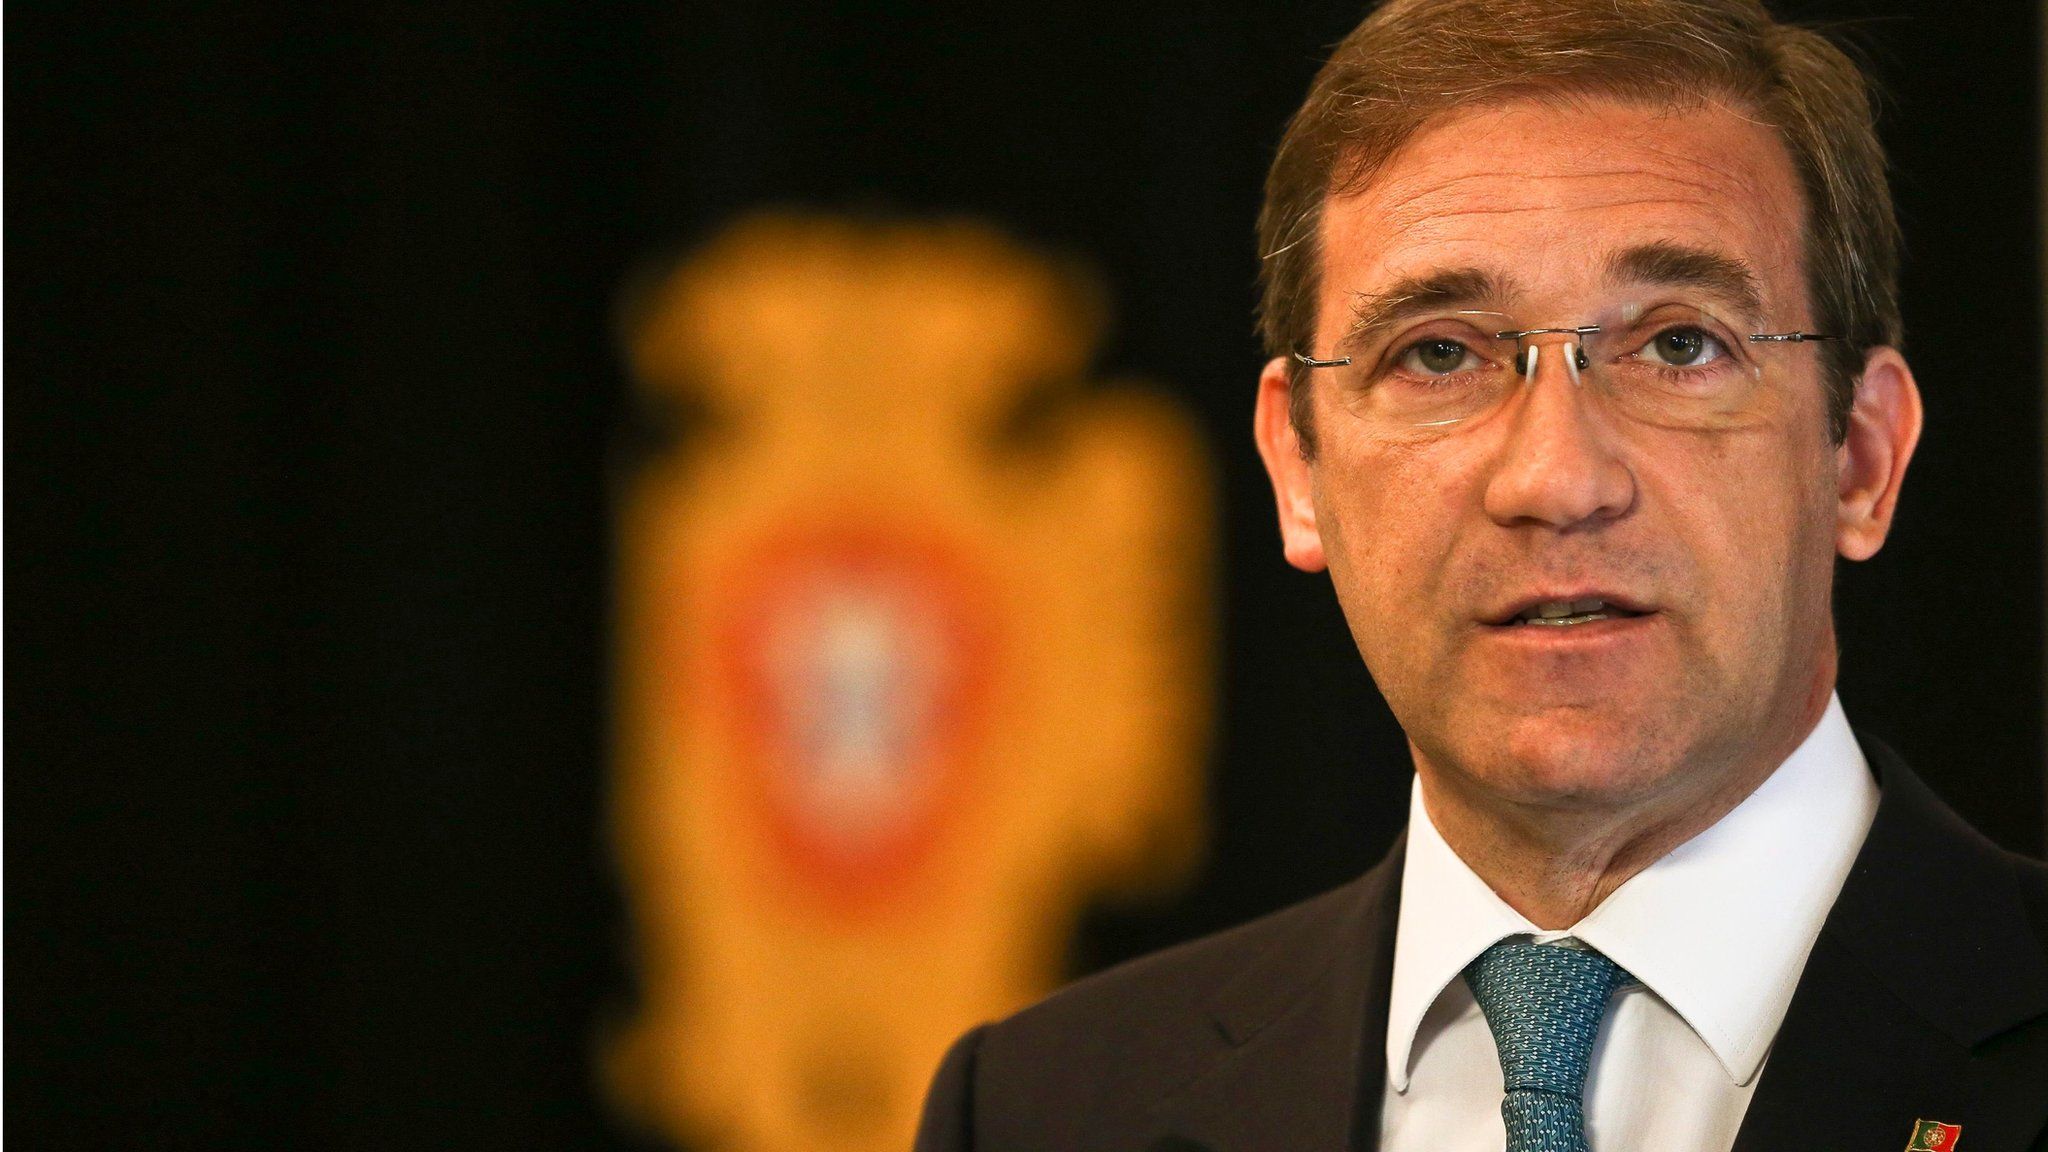 Pedro Passos Coelho speaks during a press conference following his meeting with Portuguese President Anibal Cavaco Silva (not pictured), in Lisbon, Portugal (19 October 2015)